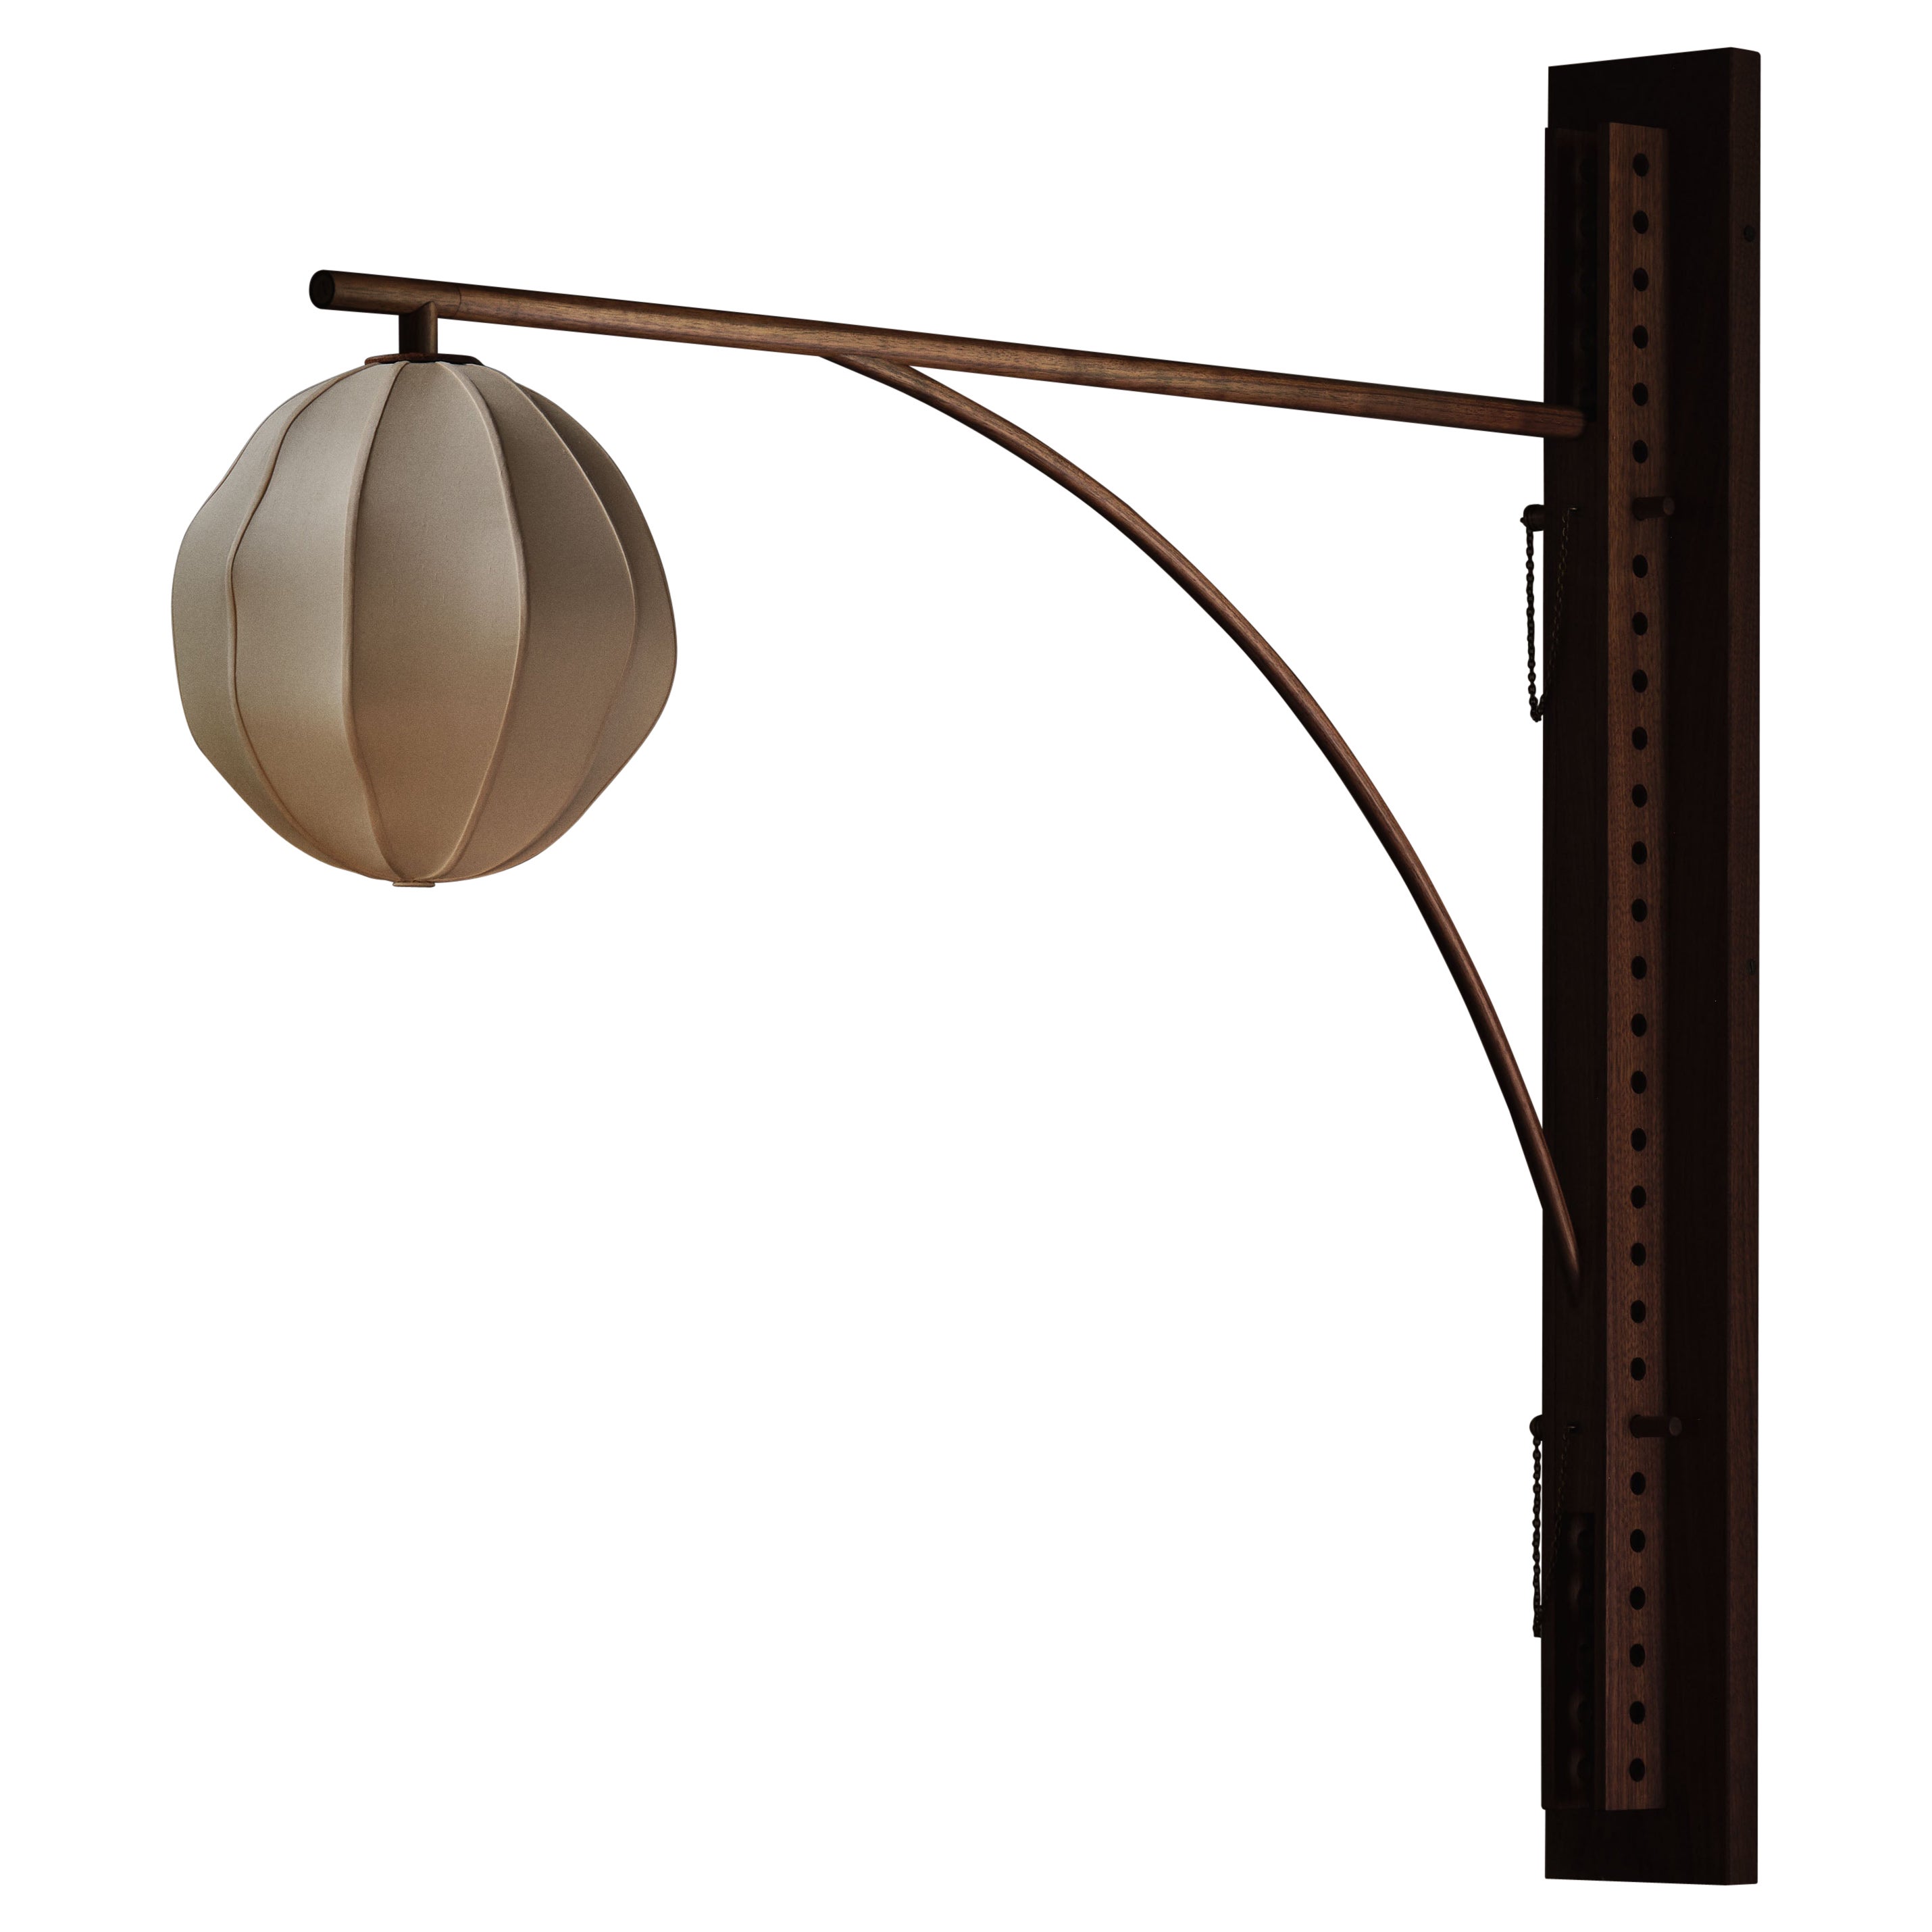 Anna Karlin Mulberry Globe Sconce - Large For Sale